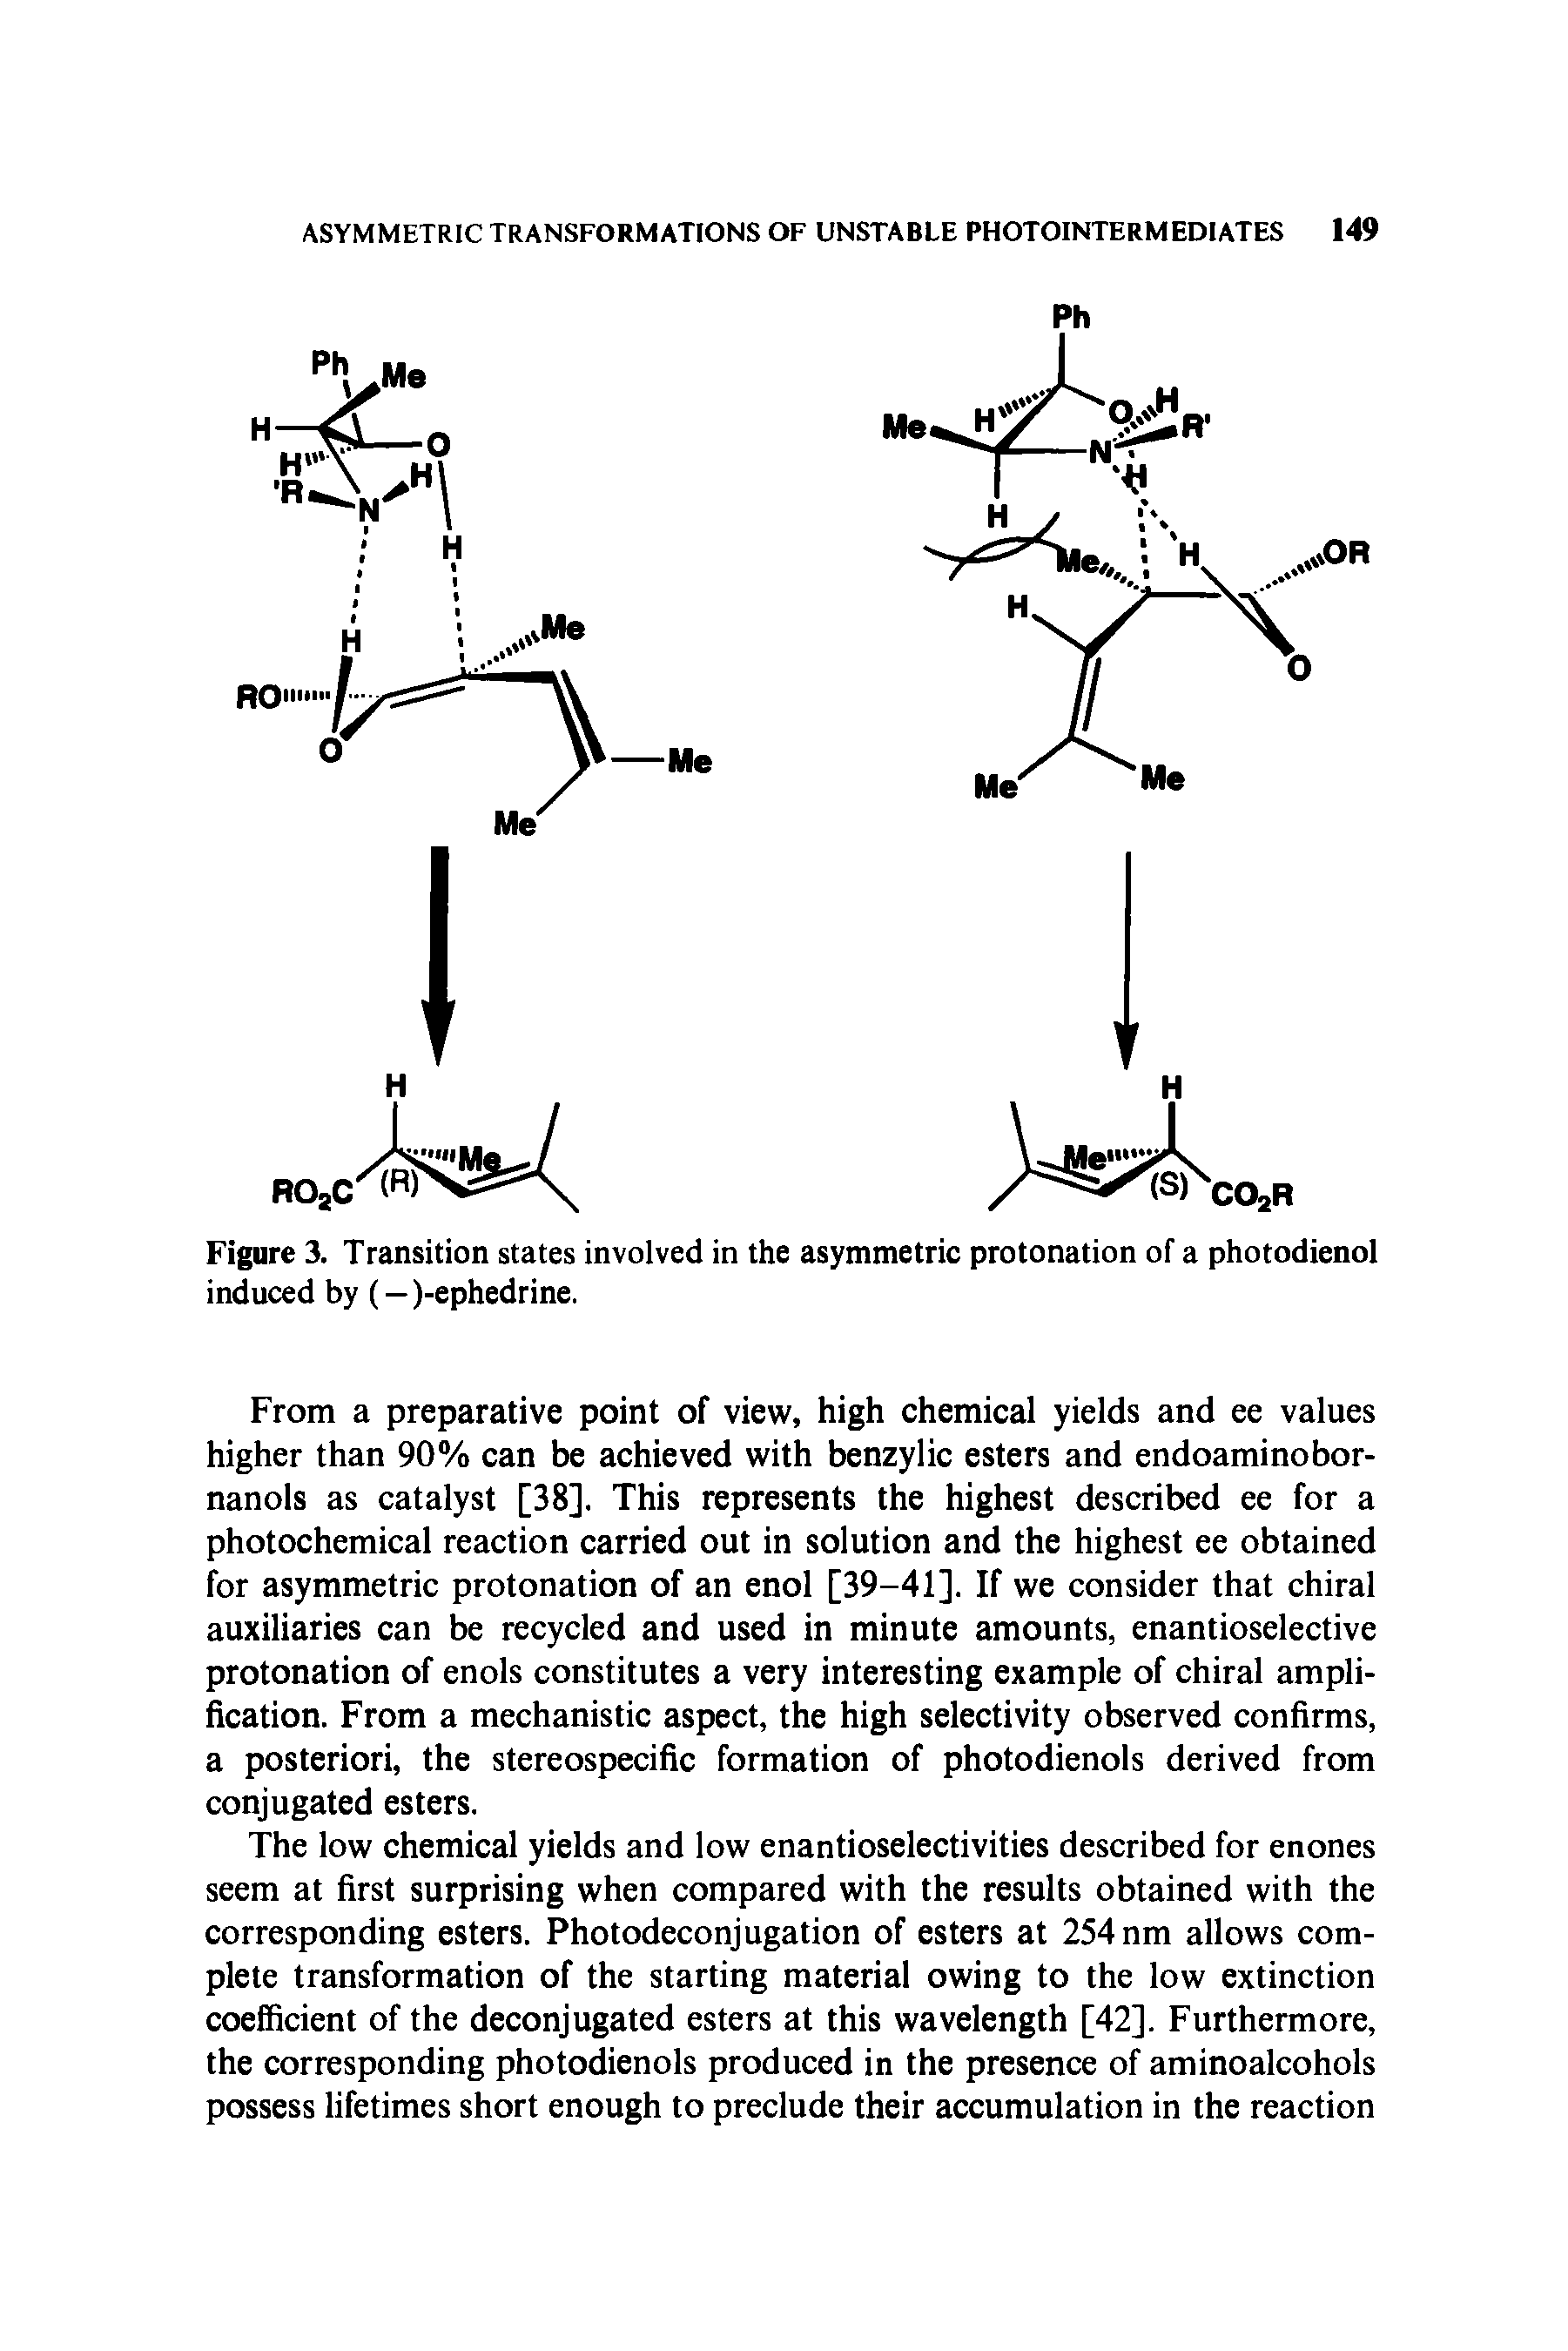 Figure 3. Transition states involved in the asymmetric protonation of a photodienol induced by ( —)-ephedrine.